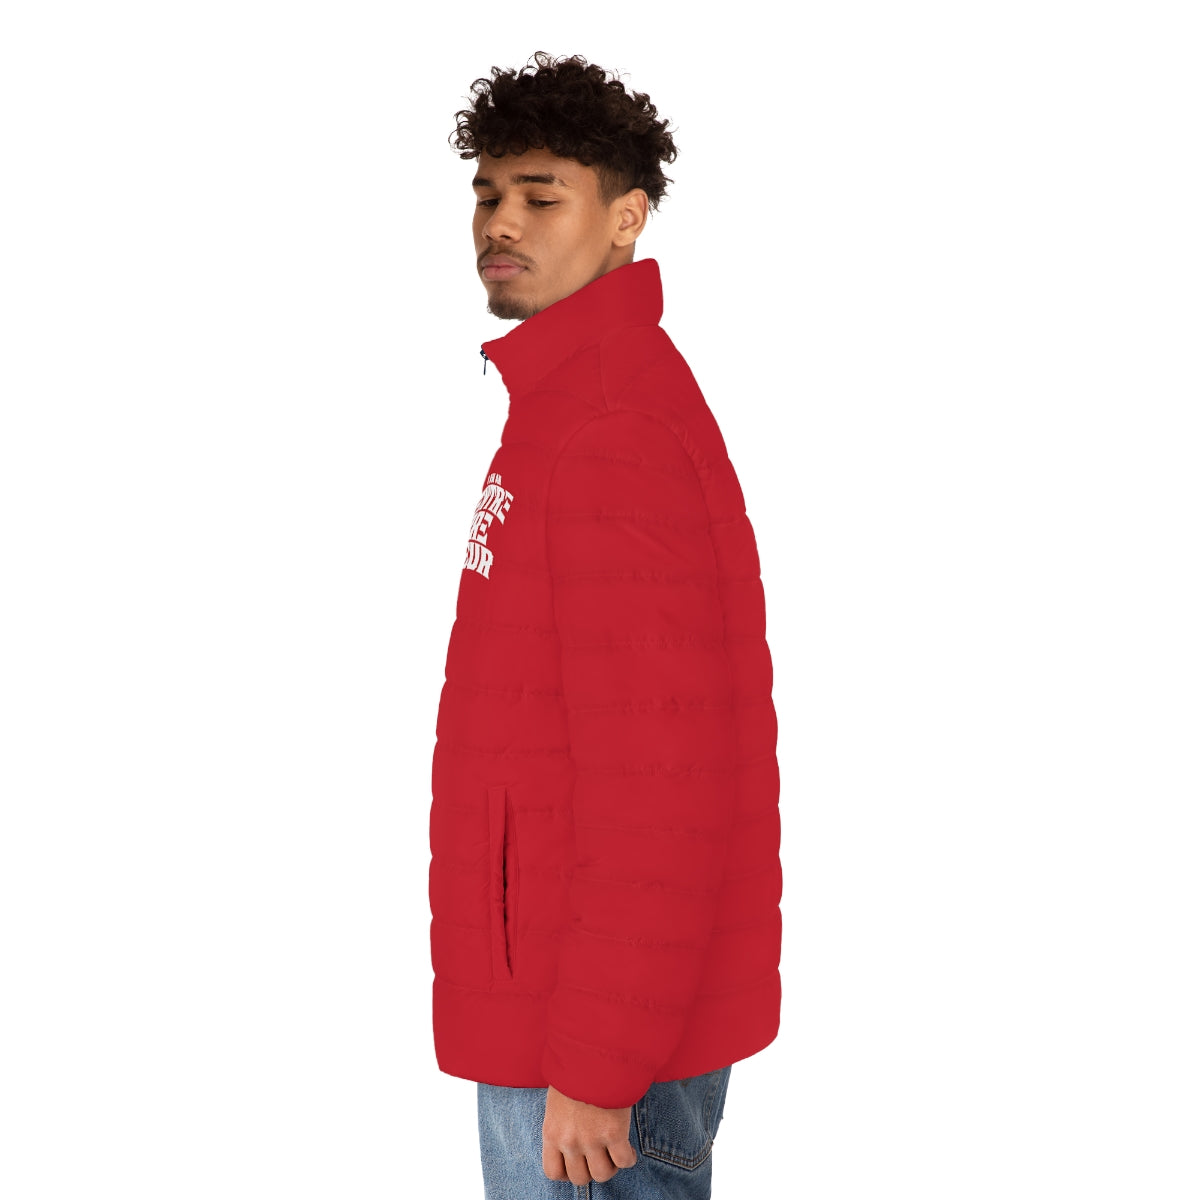 Entrepreneur Red/Navy Puffer Jacket (Fall Collection)